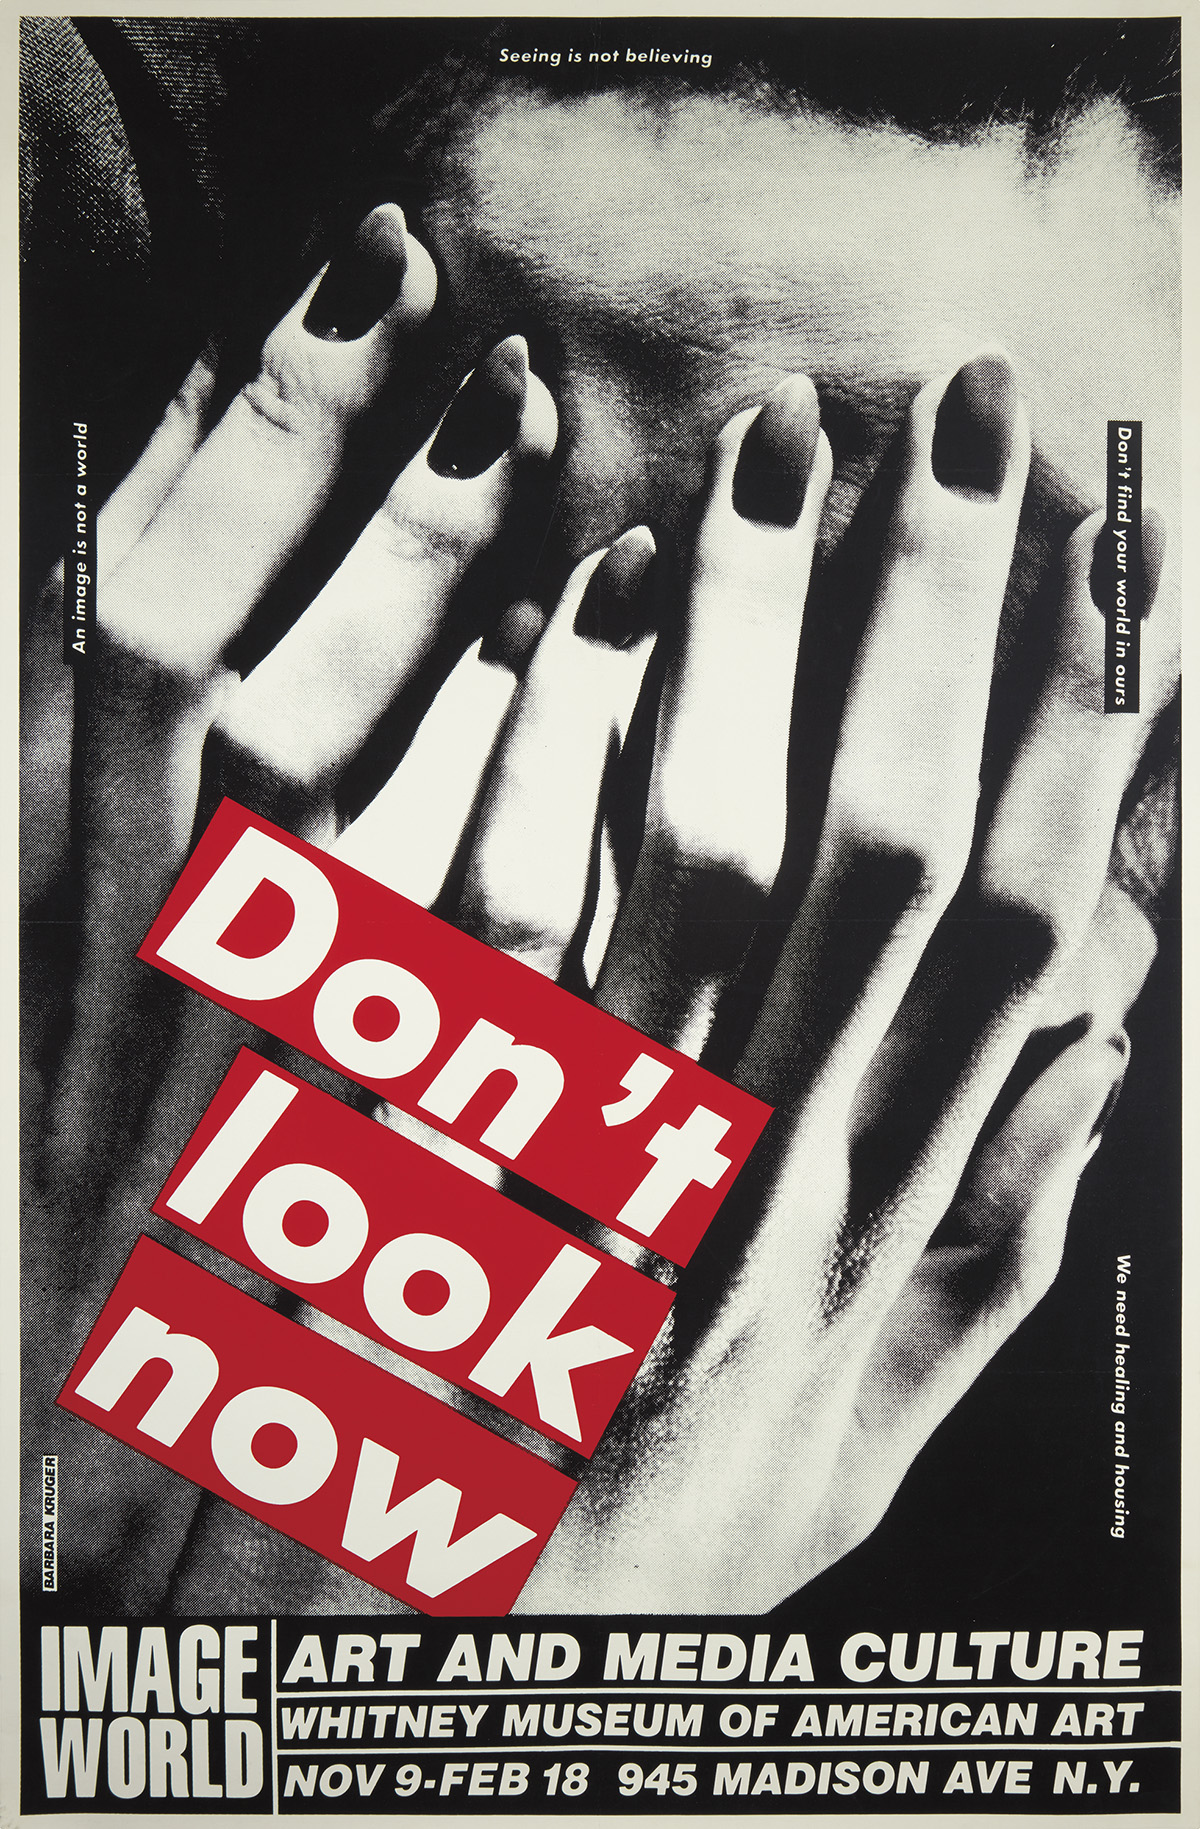 BARBARA KRUGER (1945- ). DONT LOOK NOW / WHITNEY MUSEUM. 1989. 45x29 inches, 114x75 cm.